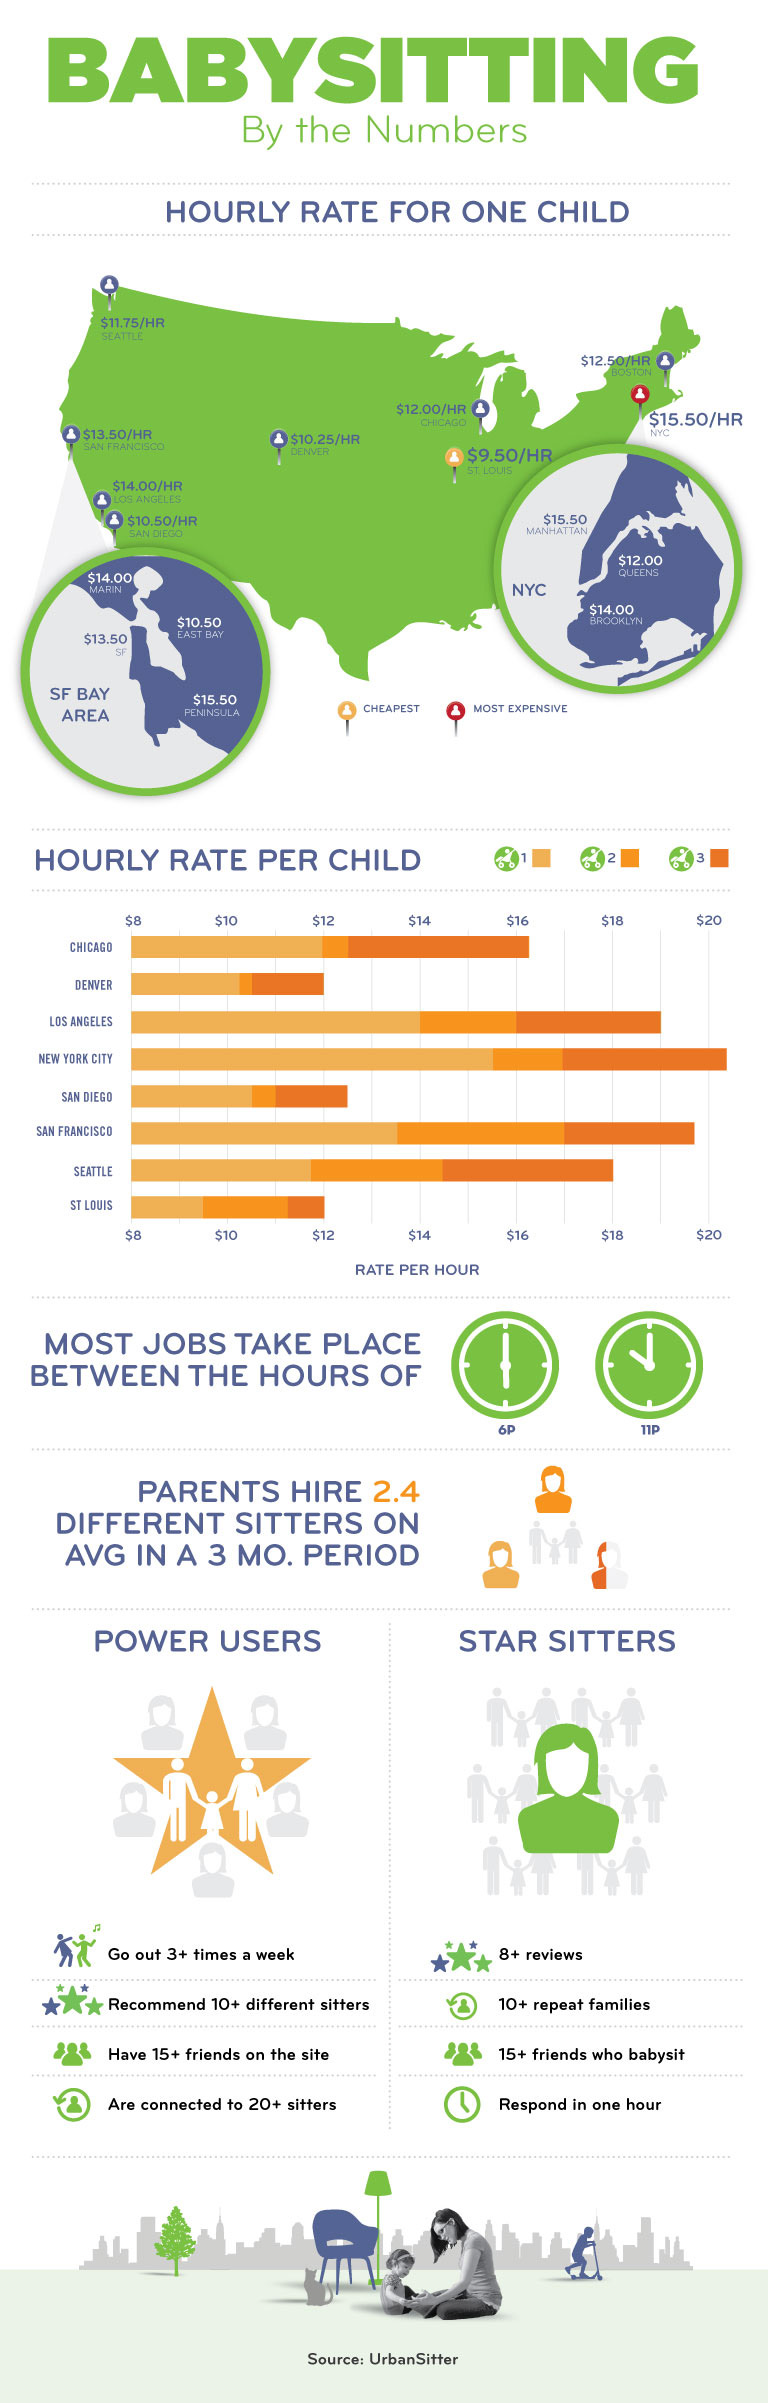 Babysitting by the Numbers - Infographic by UrbanSitter.com